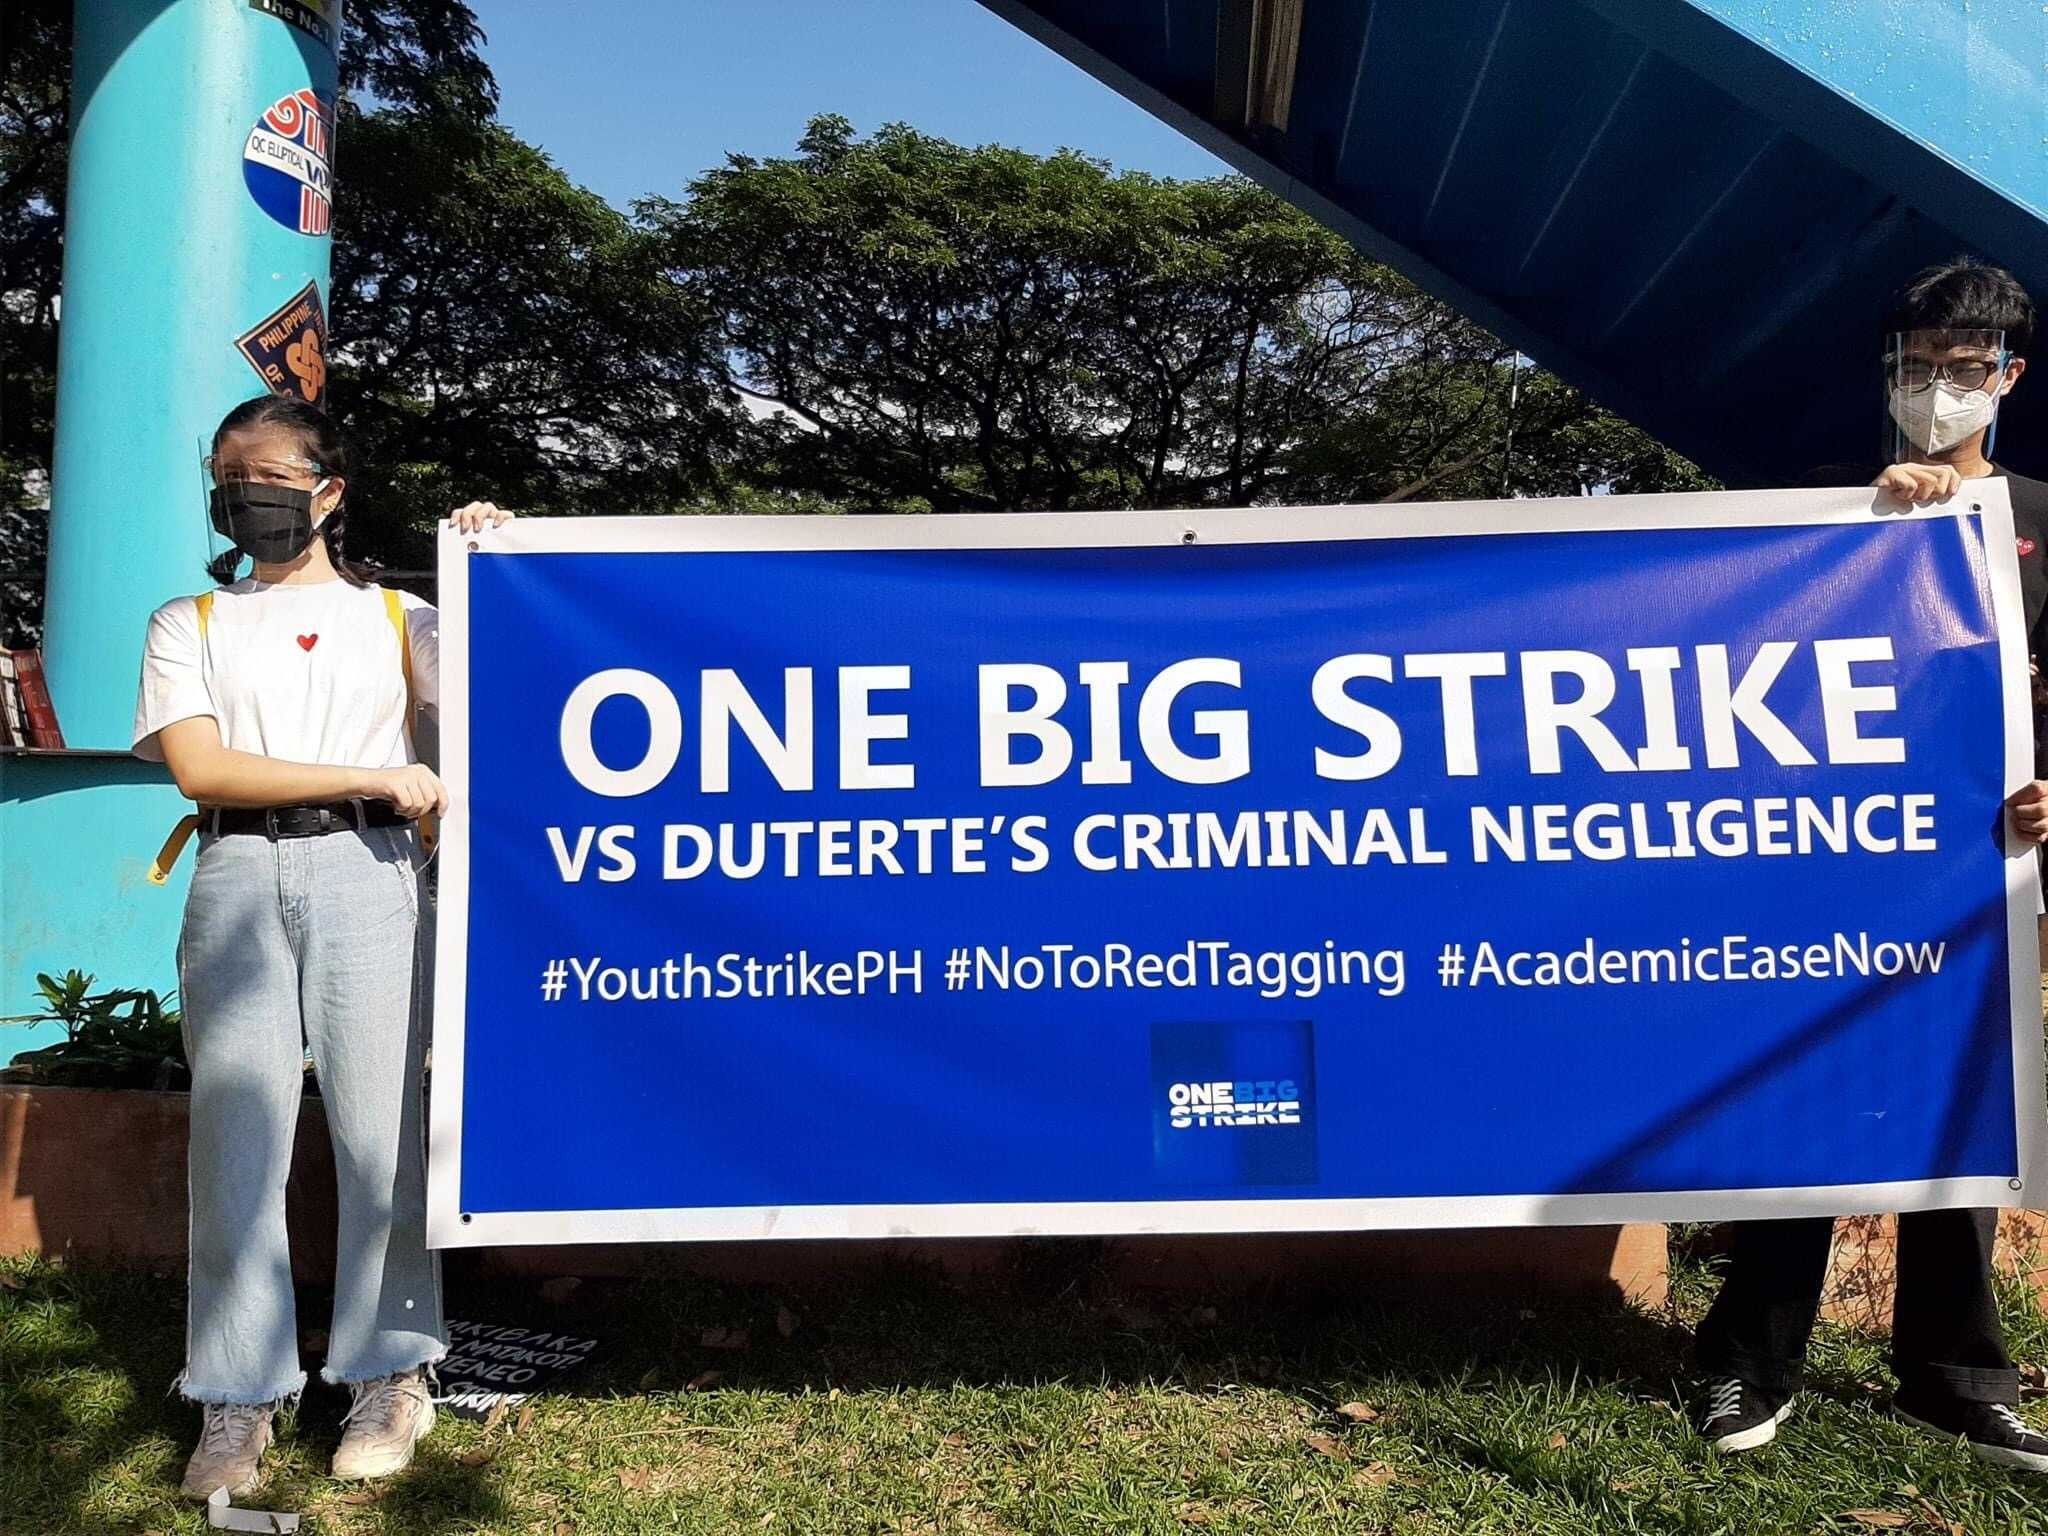 Ateneo president 'affirms' right to protest, but stops short of backing strike